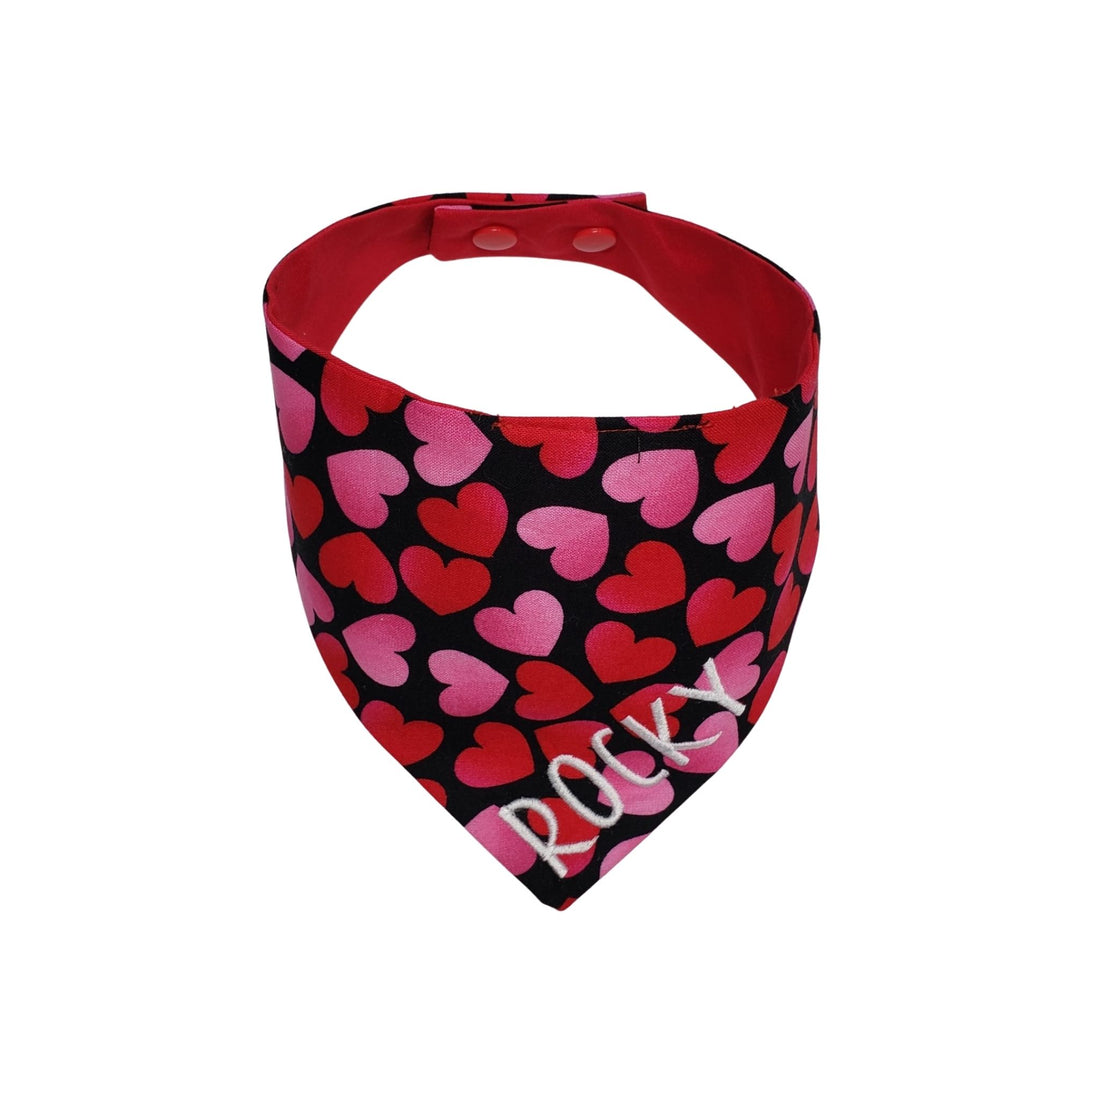 Personalized pink and red hearts on black background embroidered dog bandana. -Life Has Just Begun